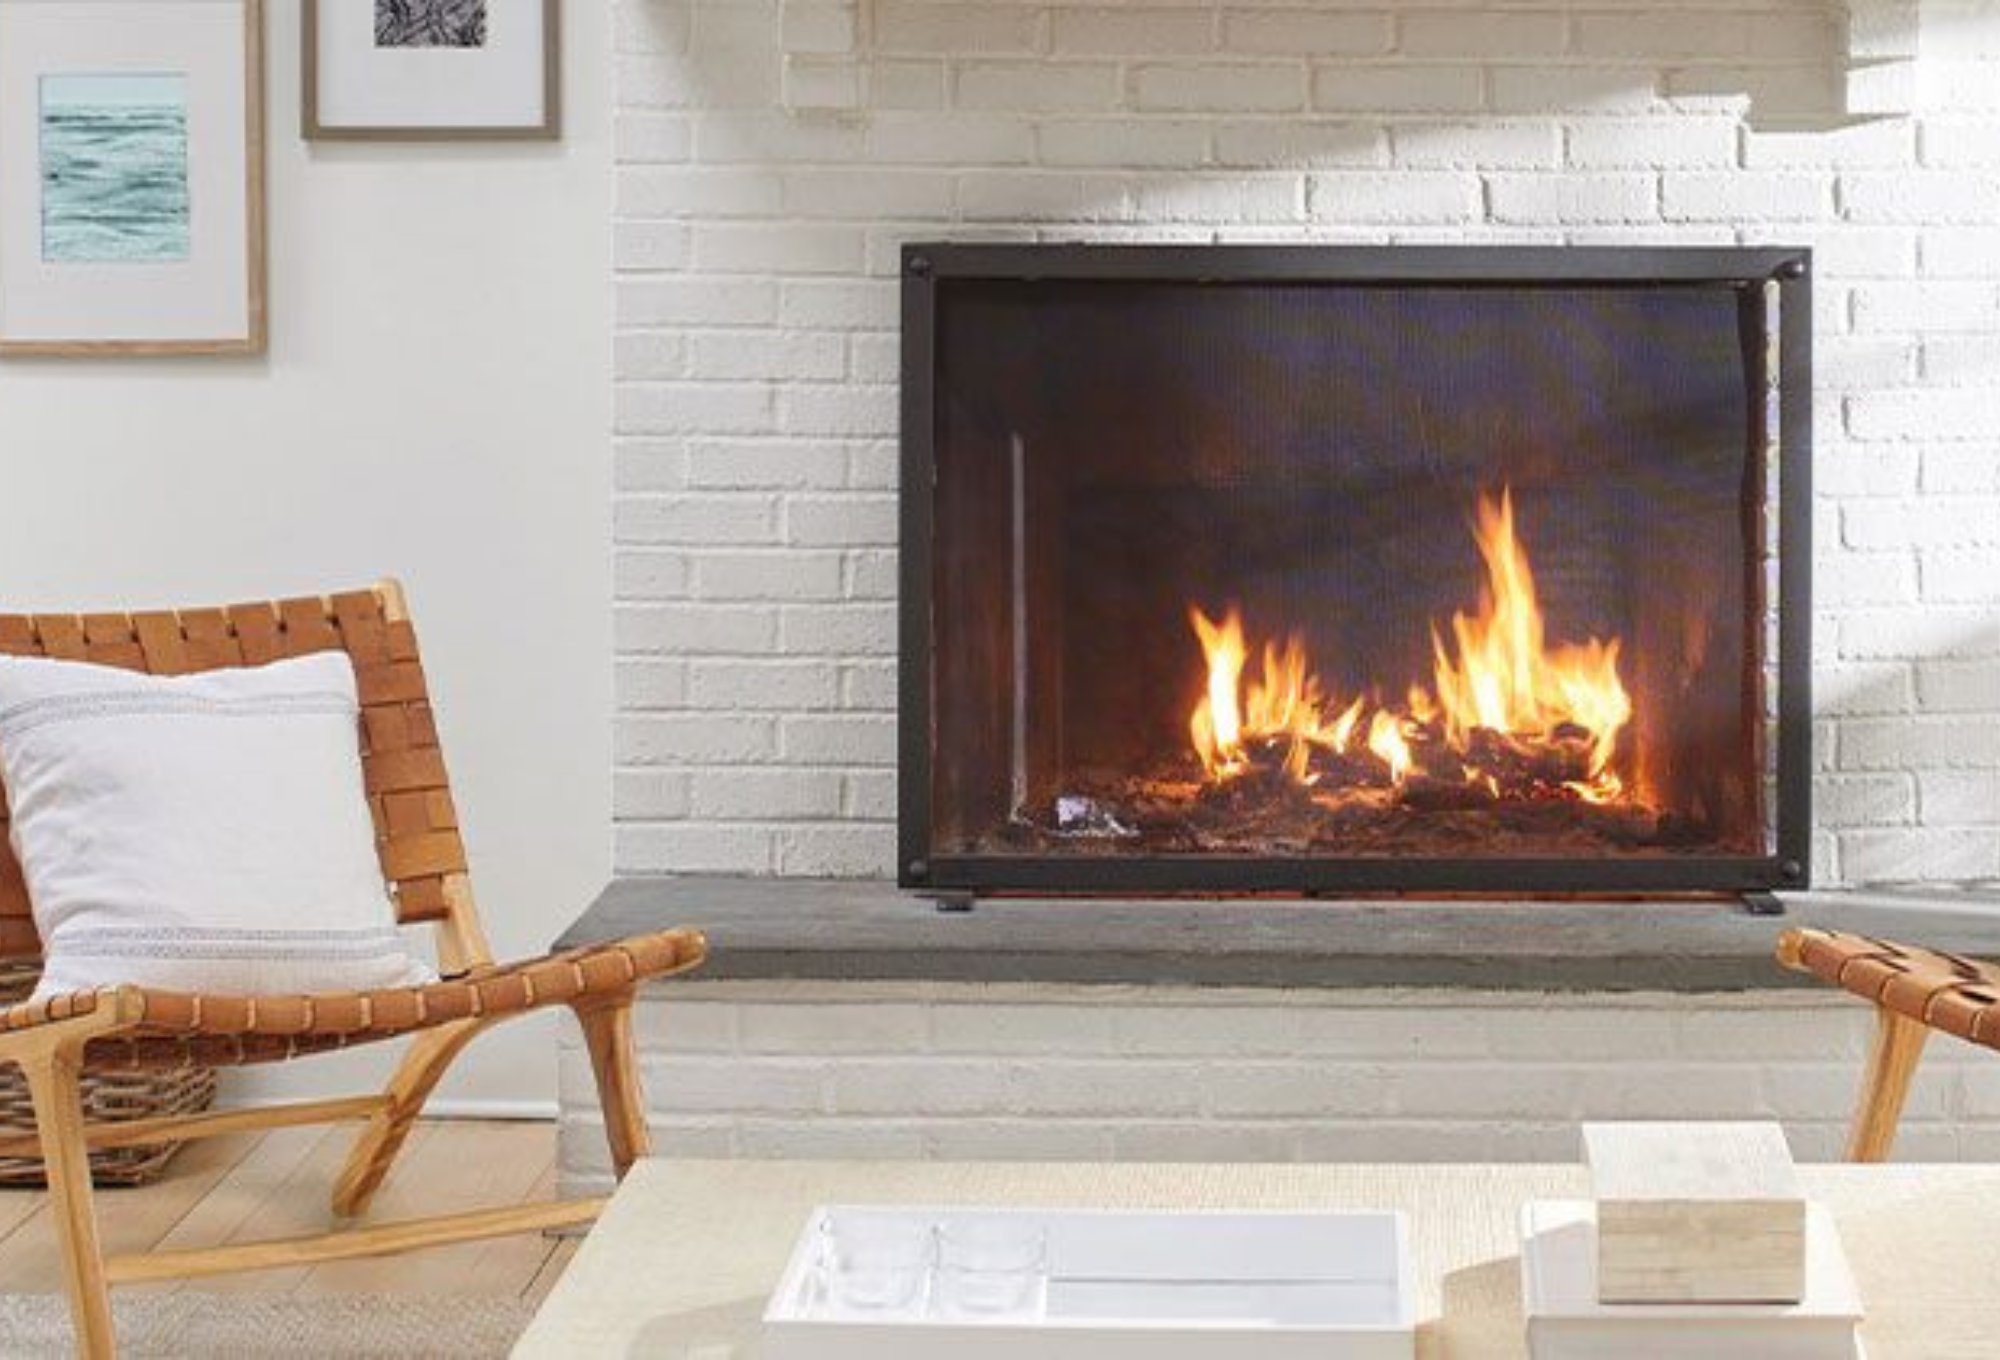 Benjamin Moore Fireplace Brick Paint available at JC Licht.